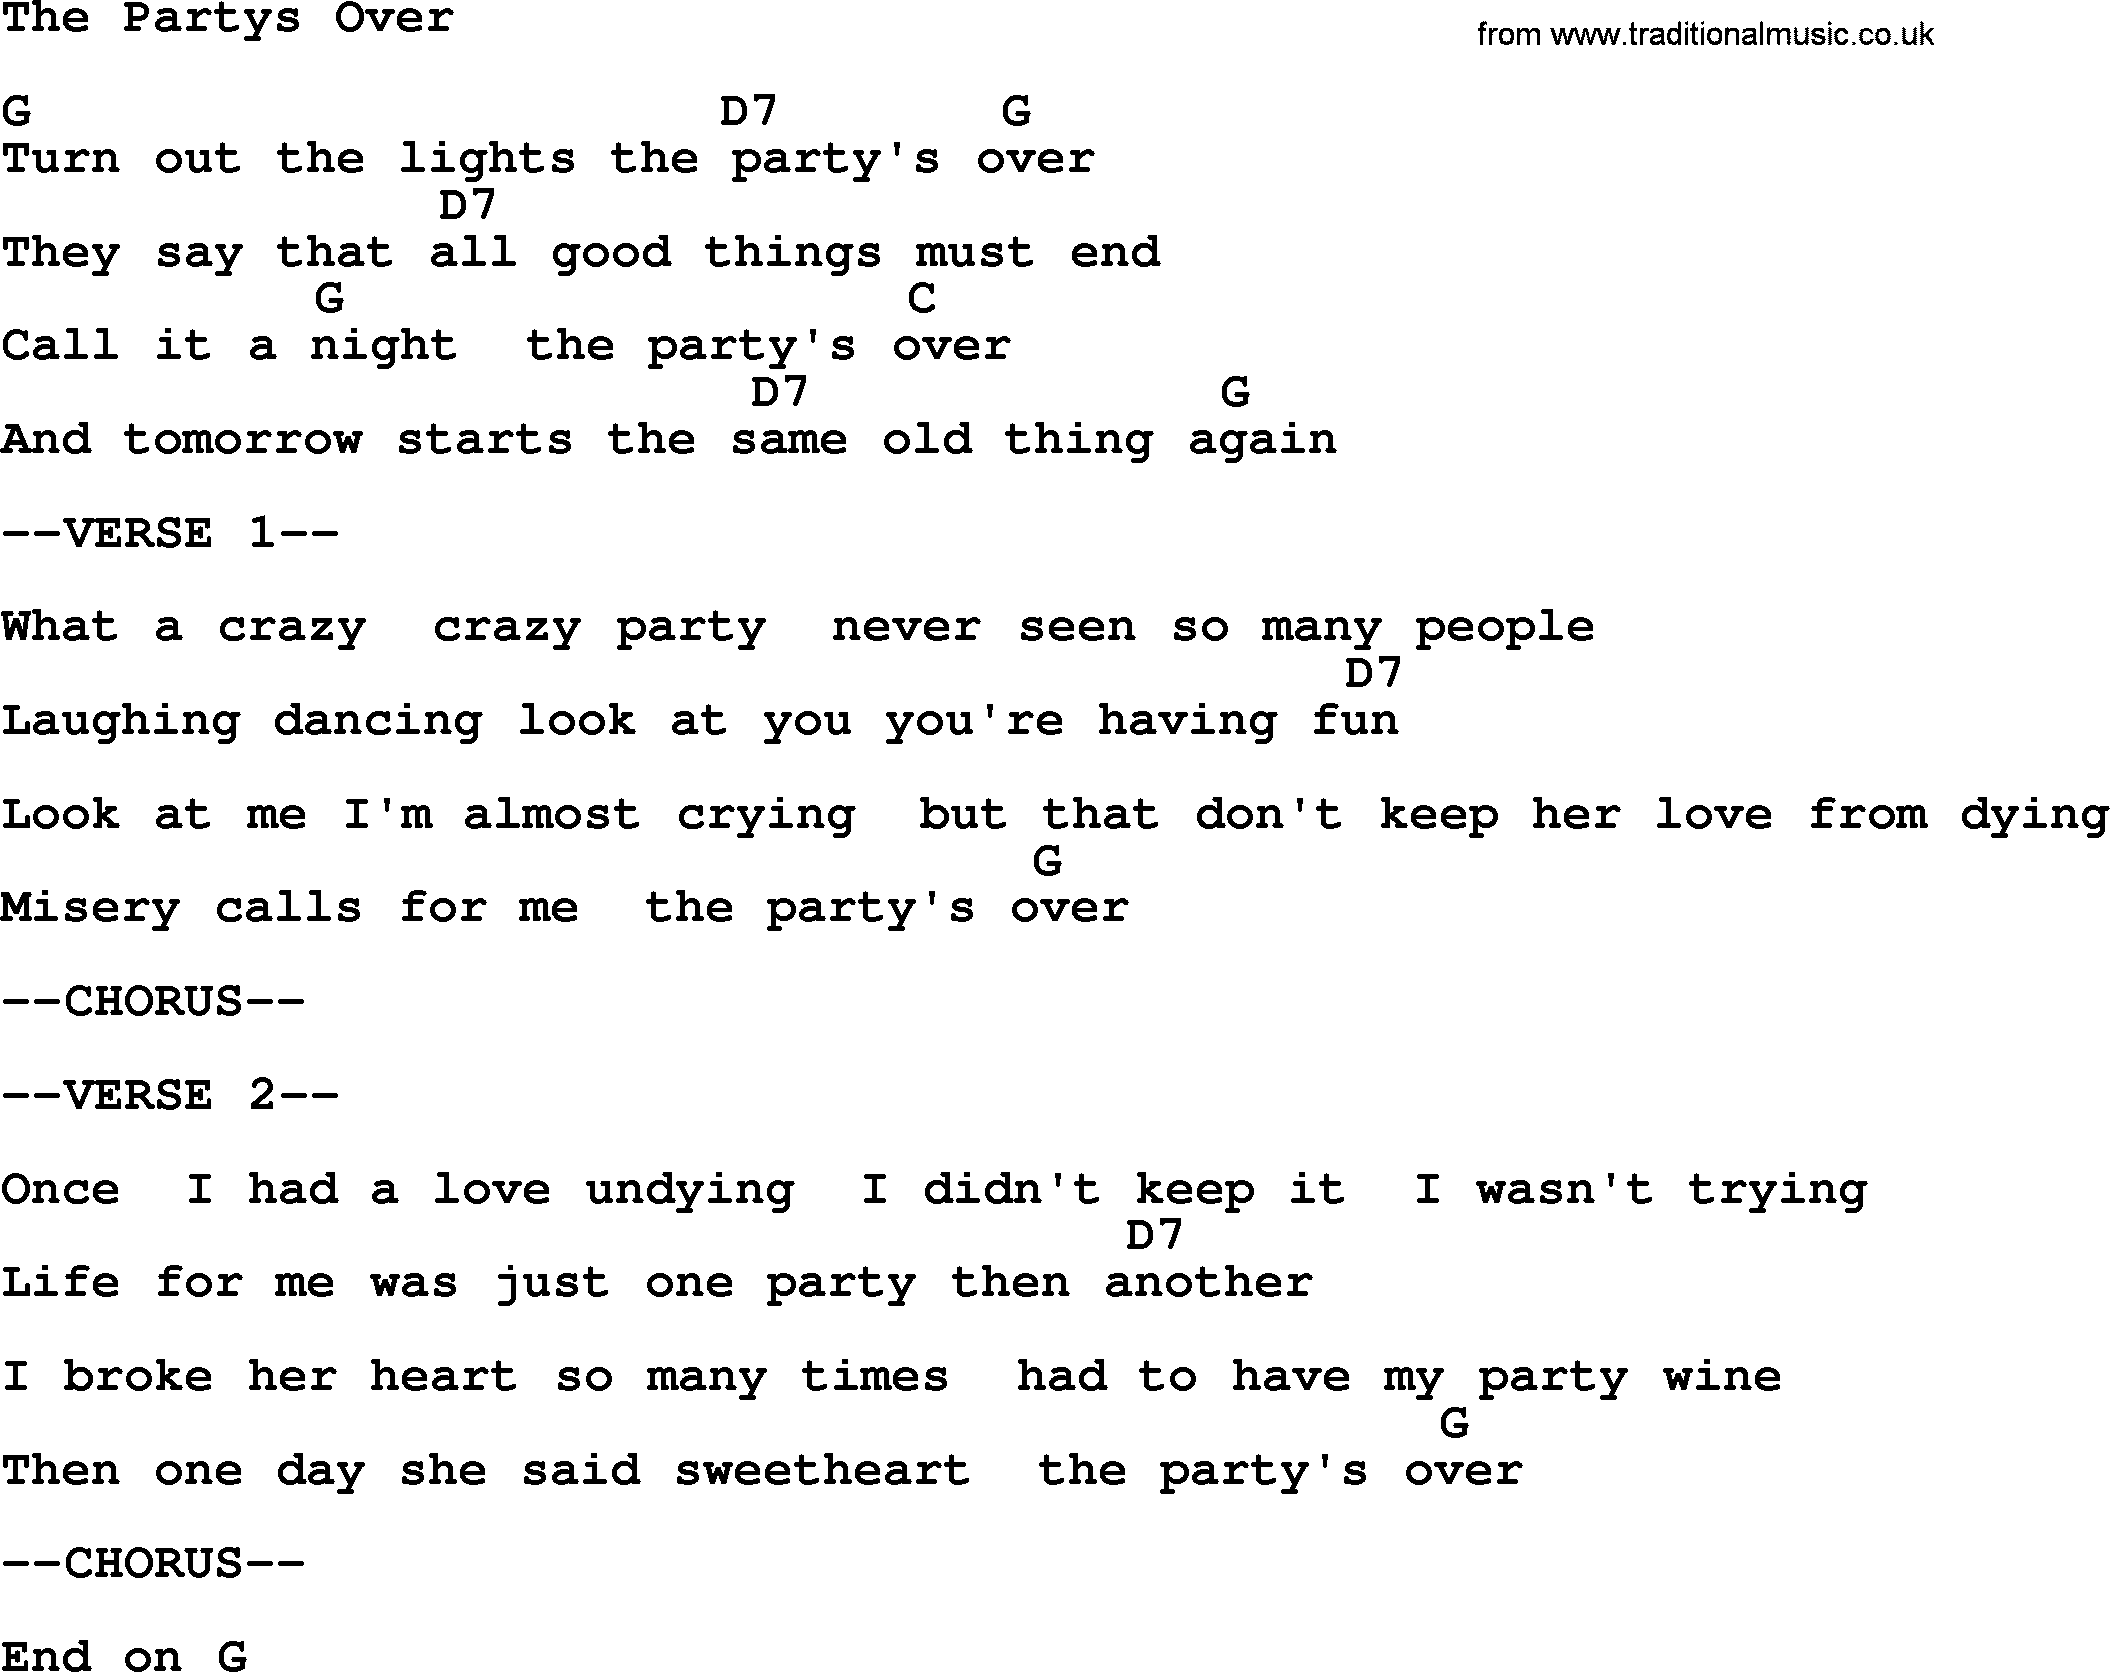 Willie Nelson song: The Partys Over, lyrics and chords